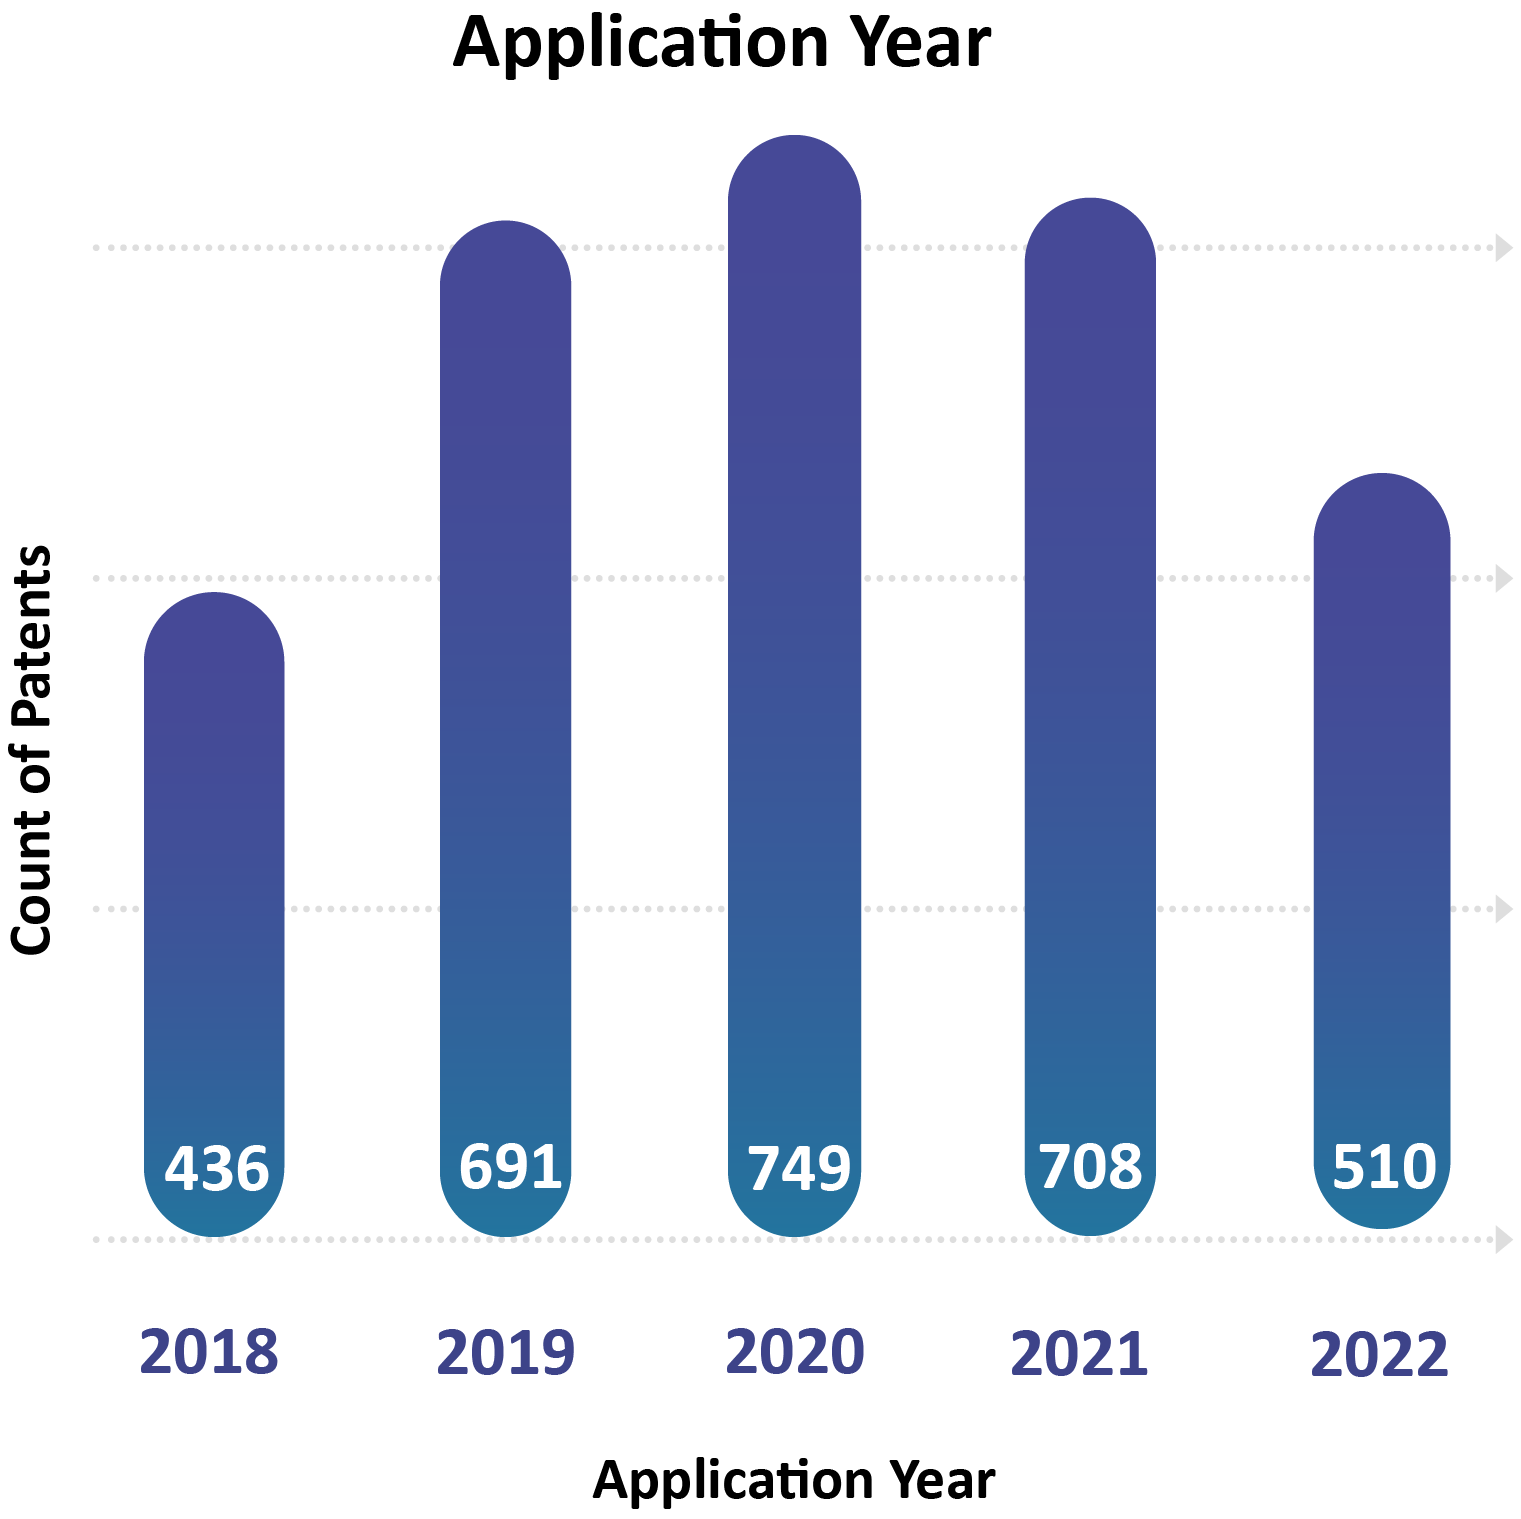 Patents around neuromorphic MEMS are steadily increasing over the years, showing the rising potential of patent monetization in neuromorphic MEMS.